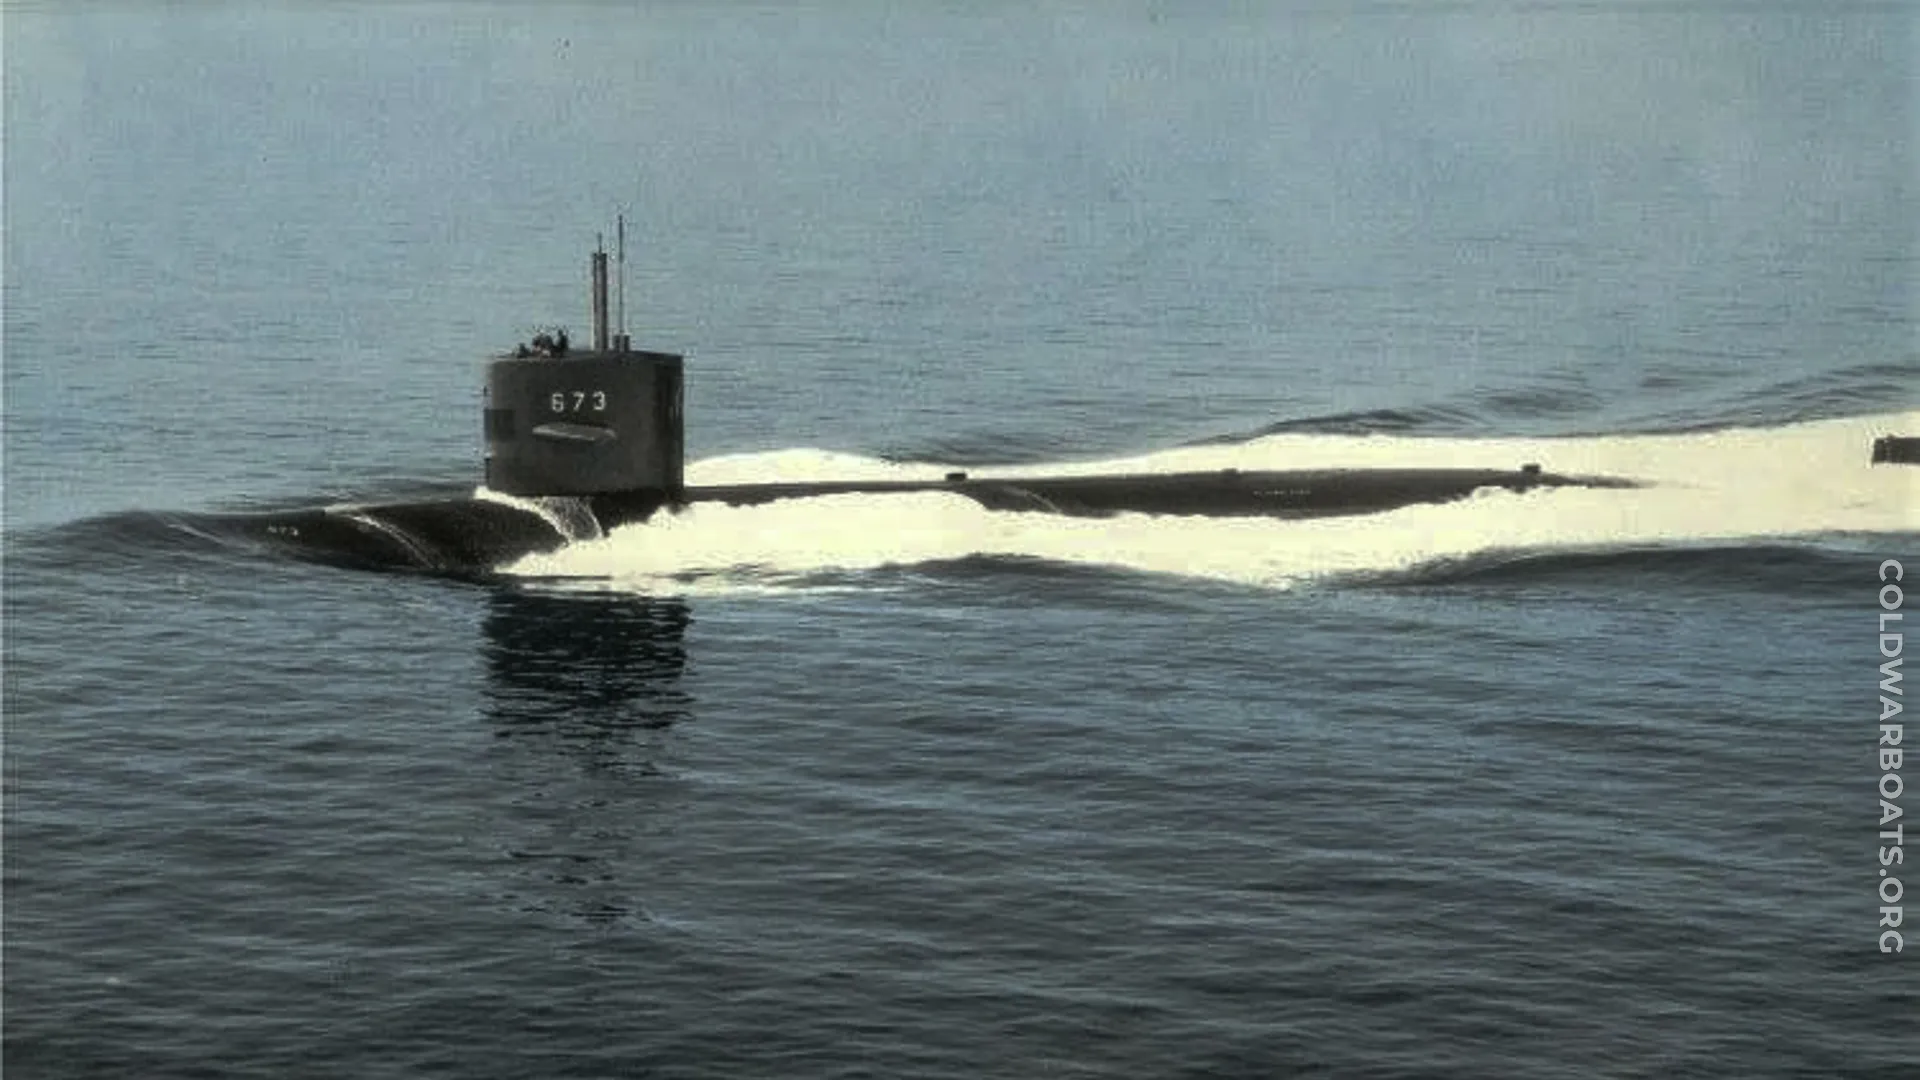 The USS FLYING FISH (SSN 673) cuts a wake during sea trials.